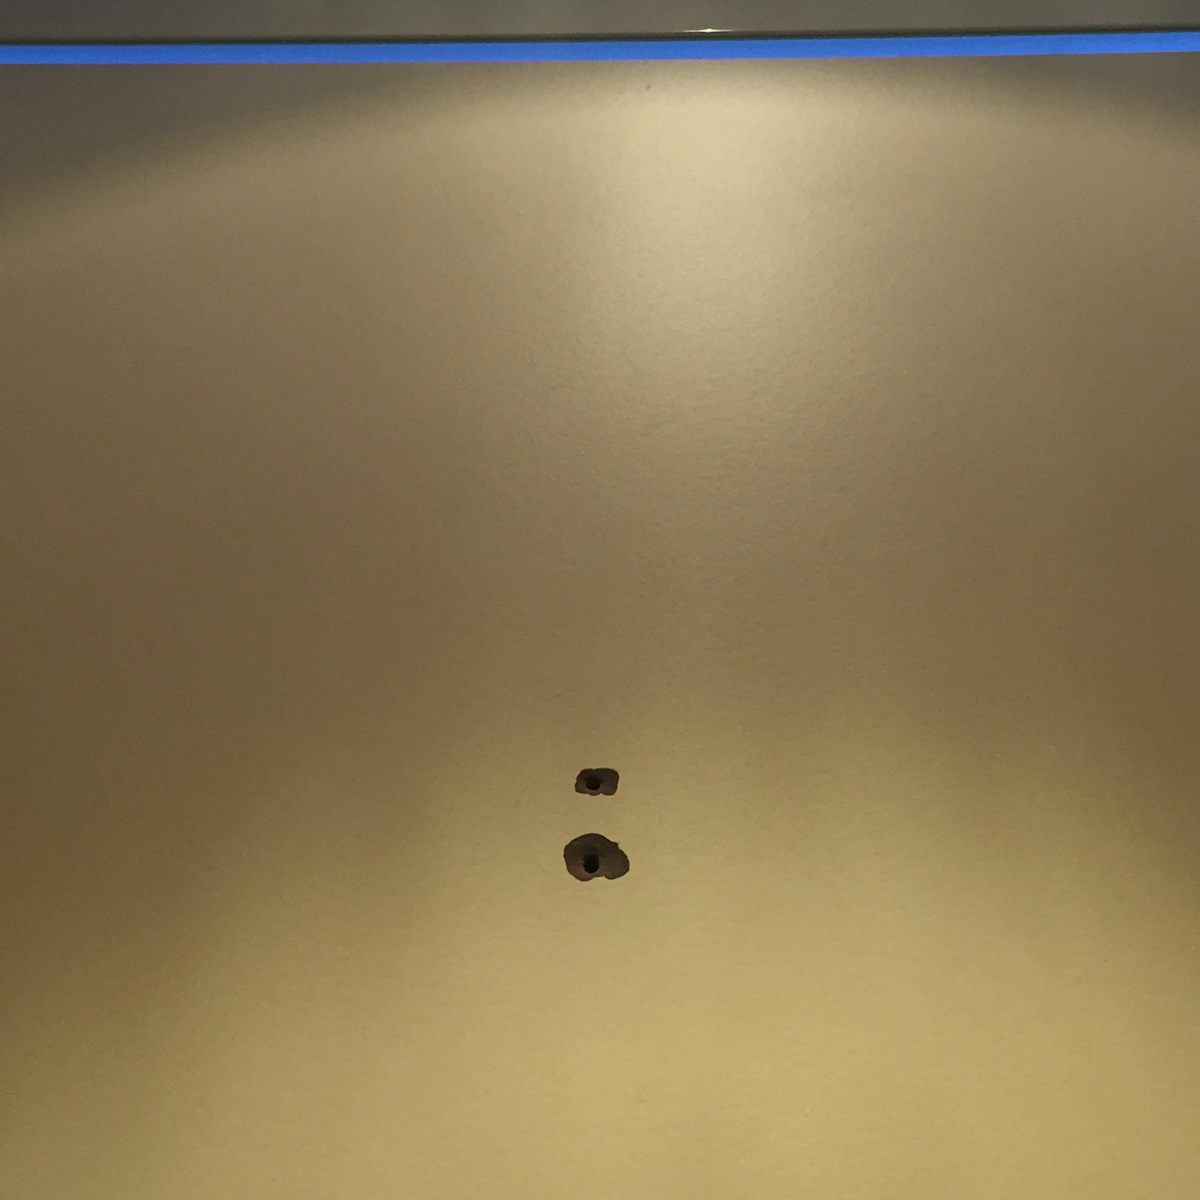 holes where hooks had been ripped off were common in the public restrooms